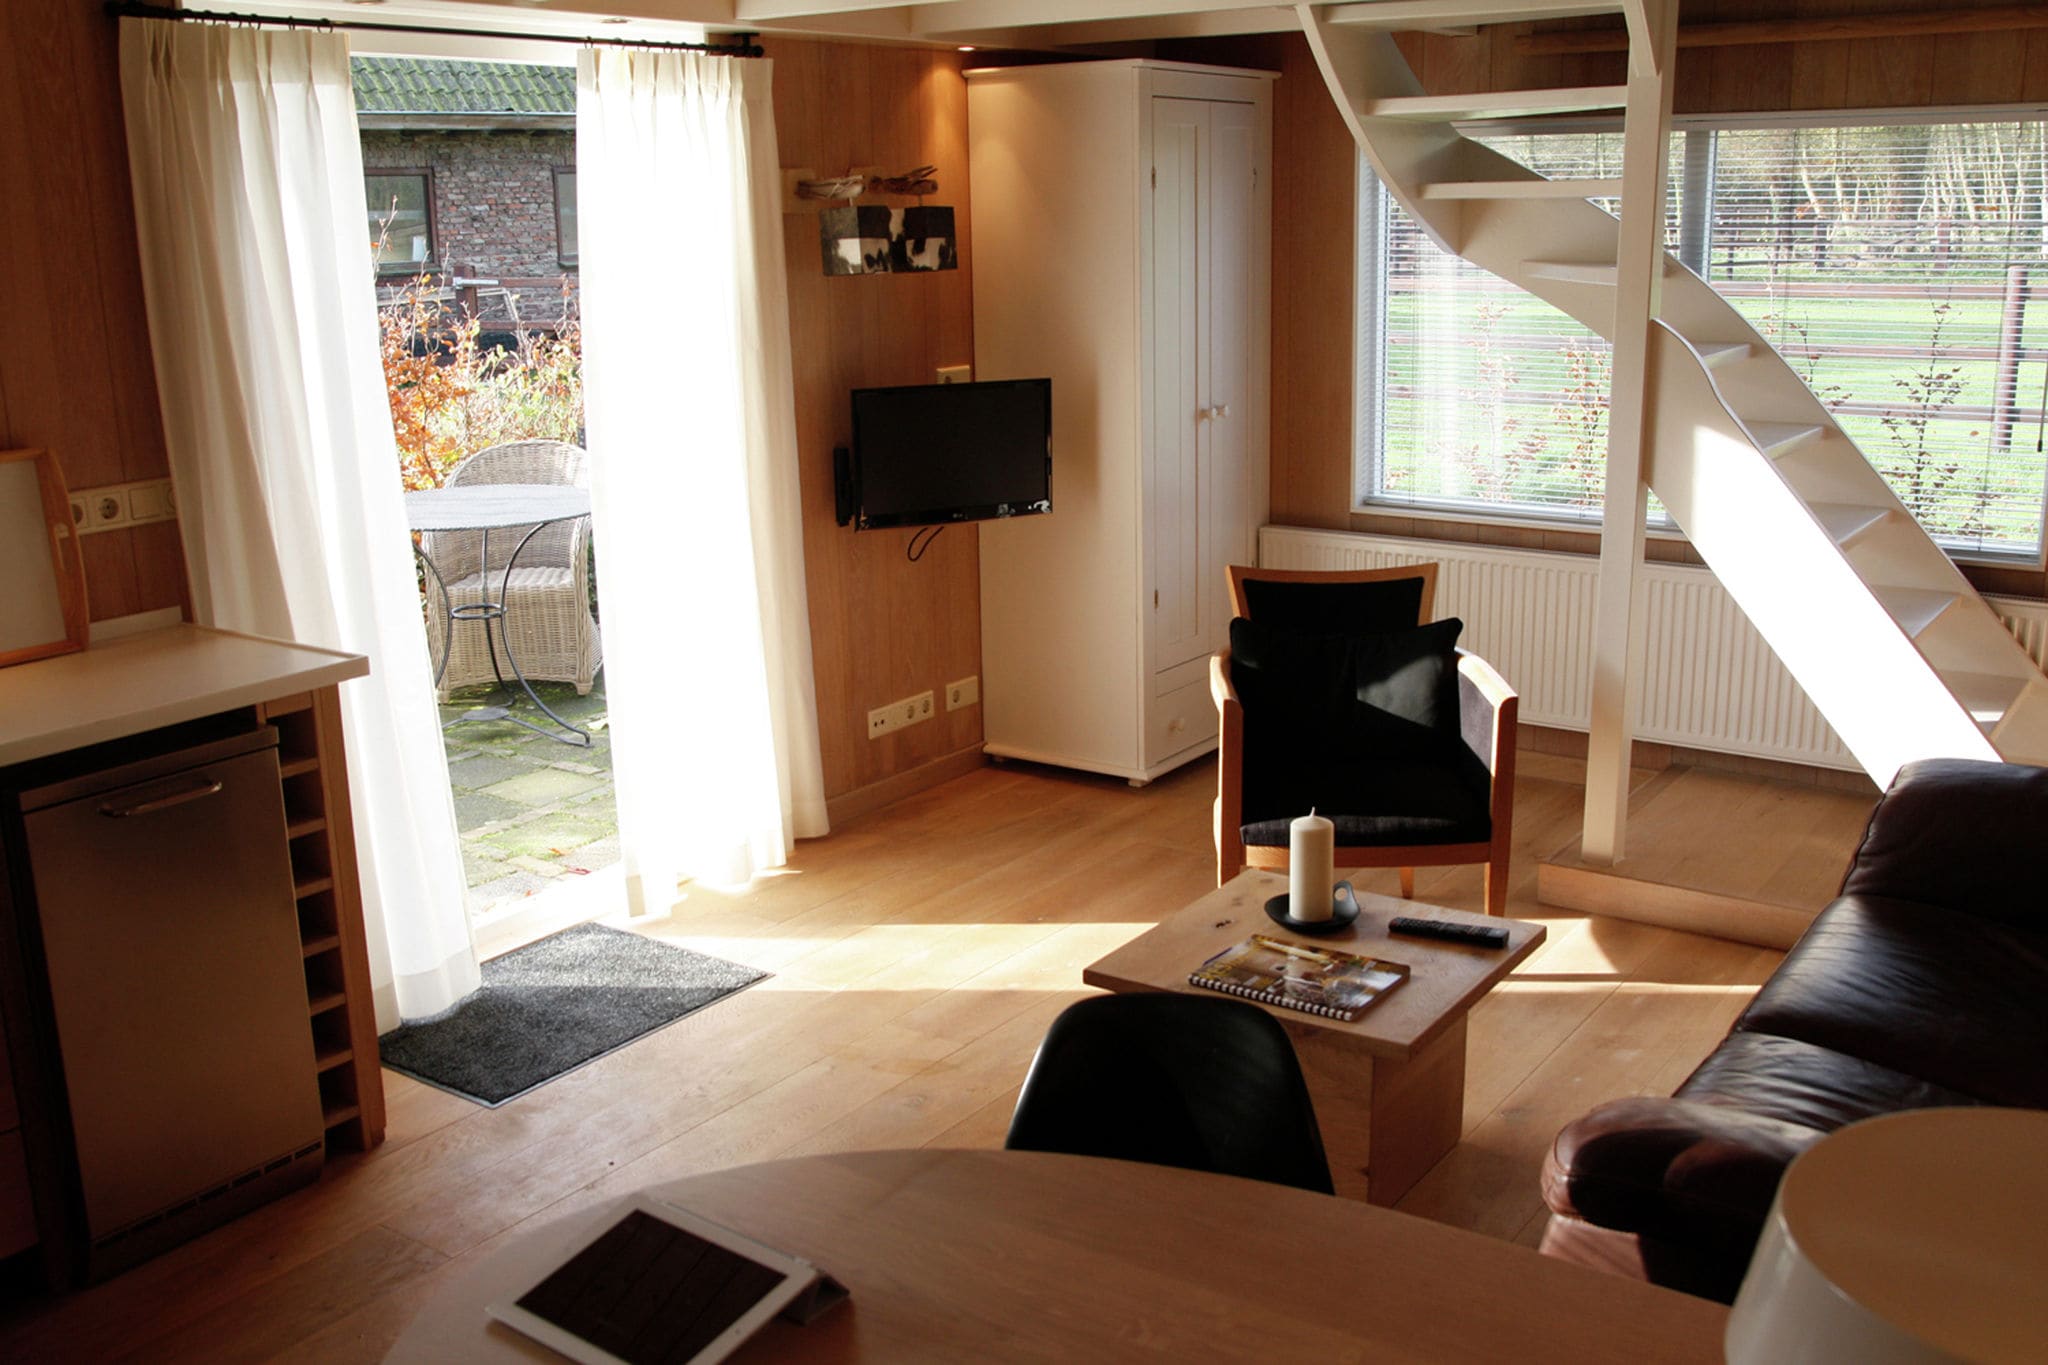 Holiday home for two people at a peaceful, central location in Heiloo near Egmond